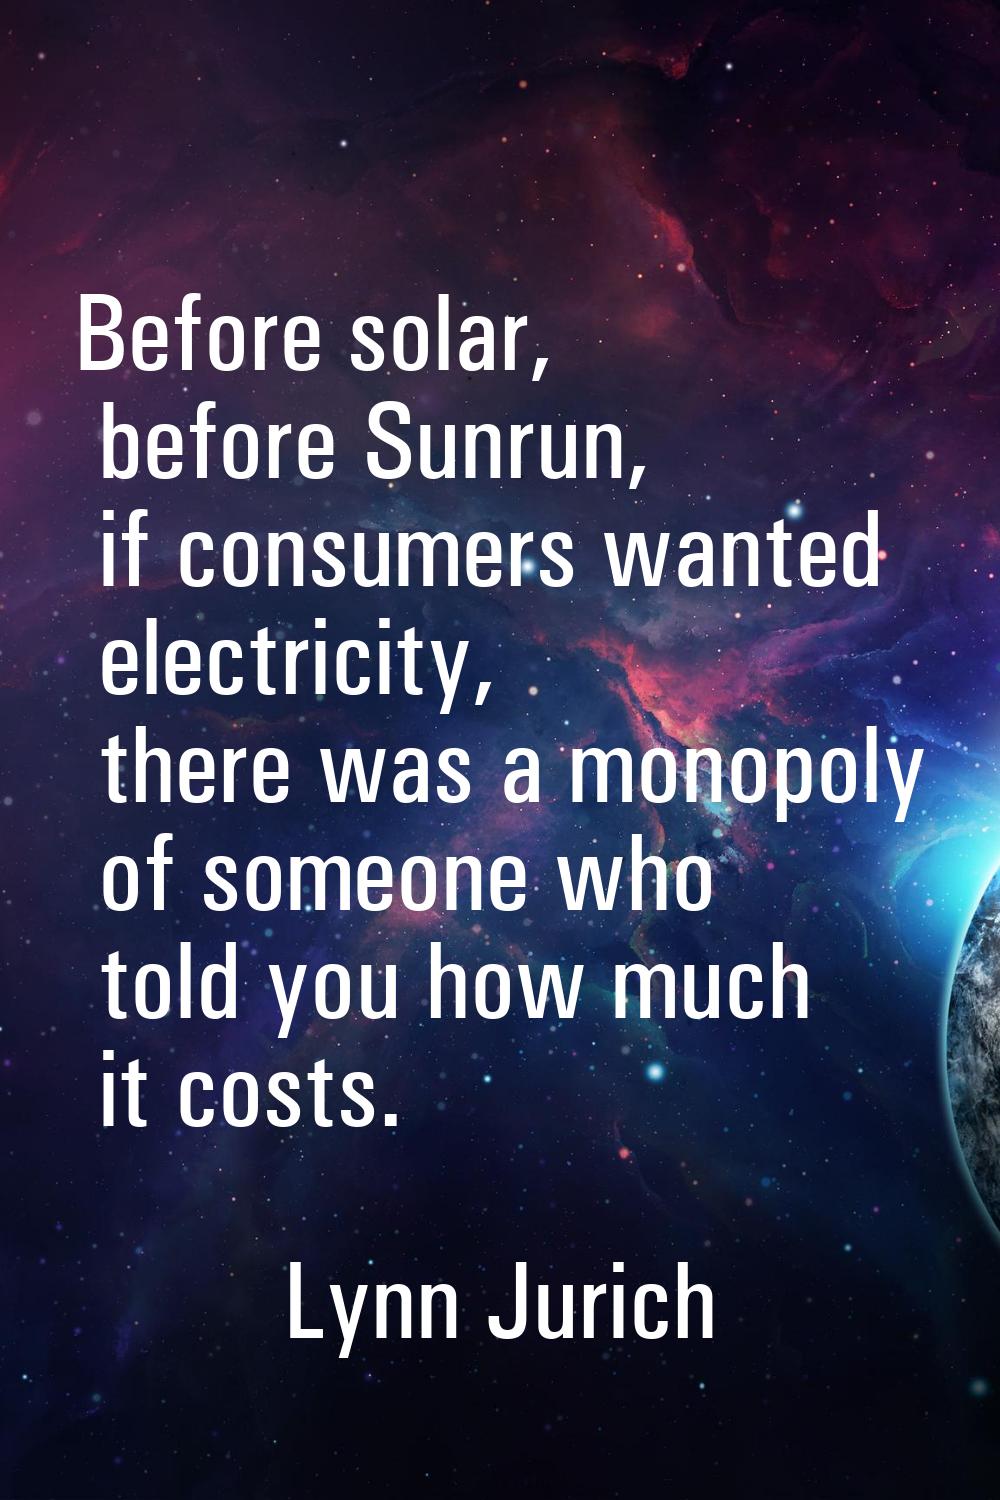 Before solar, before Sunrun, if consumers wanted electricity, there was a monopoly of someone who t